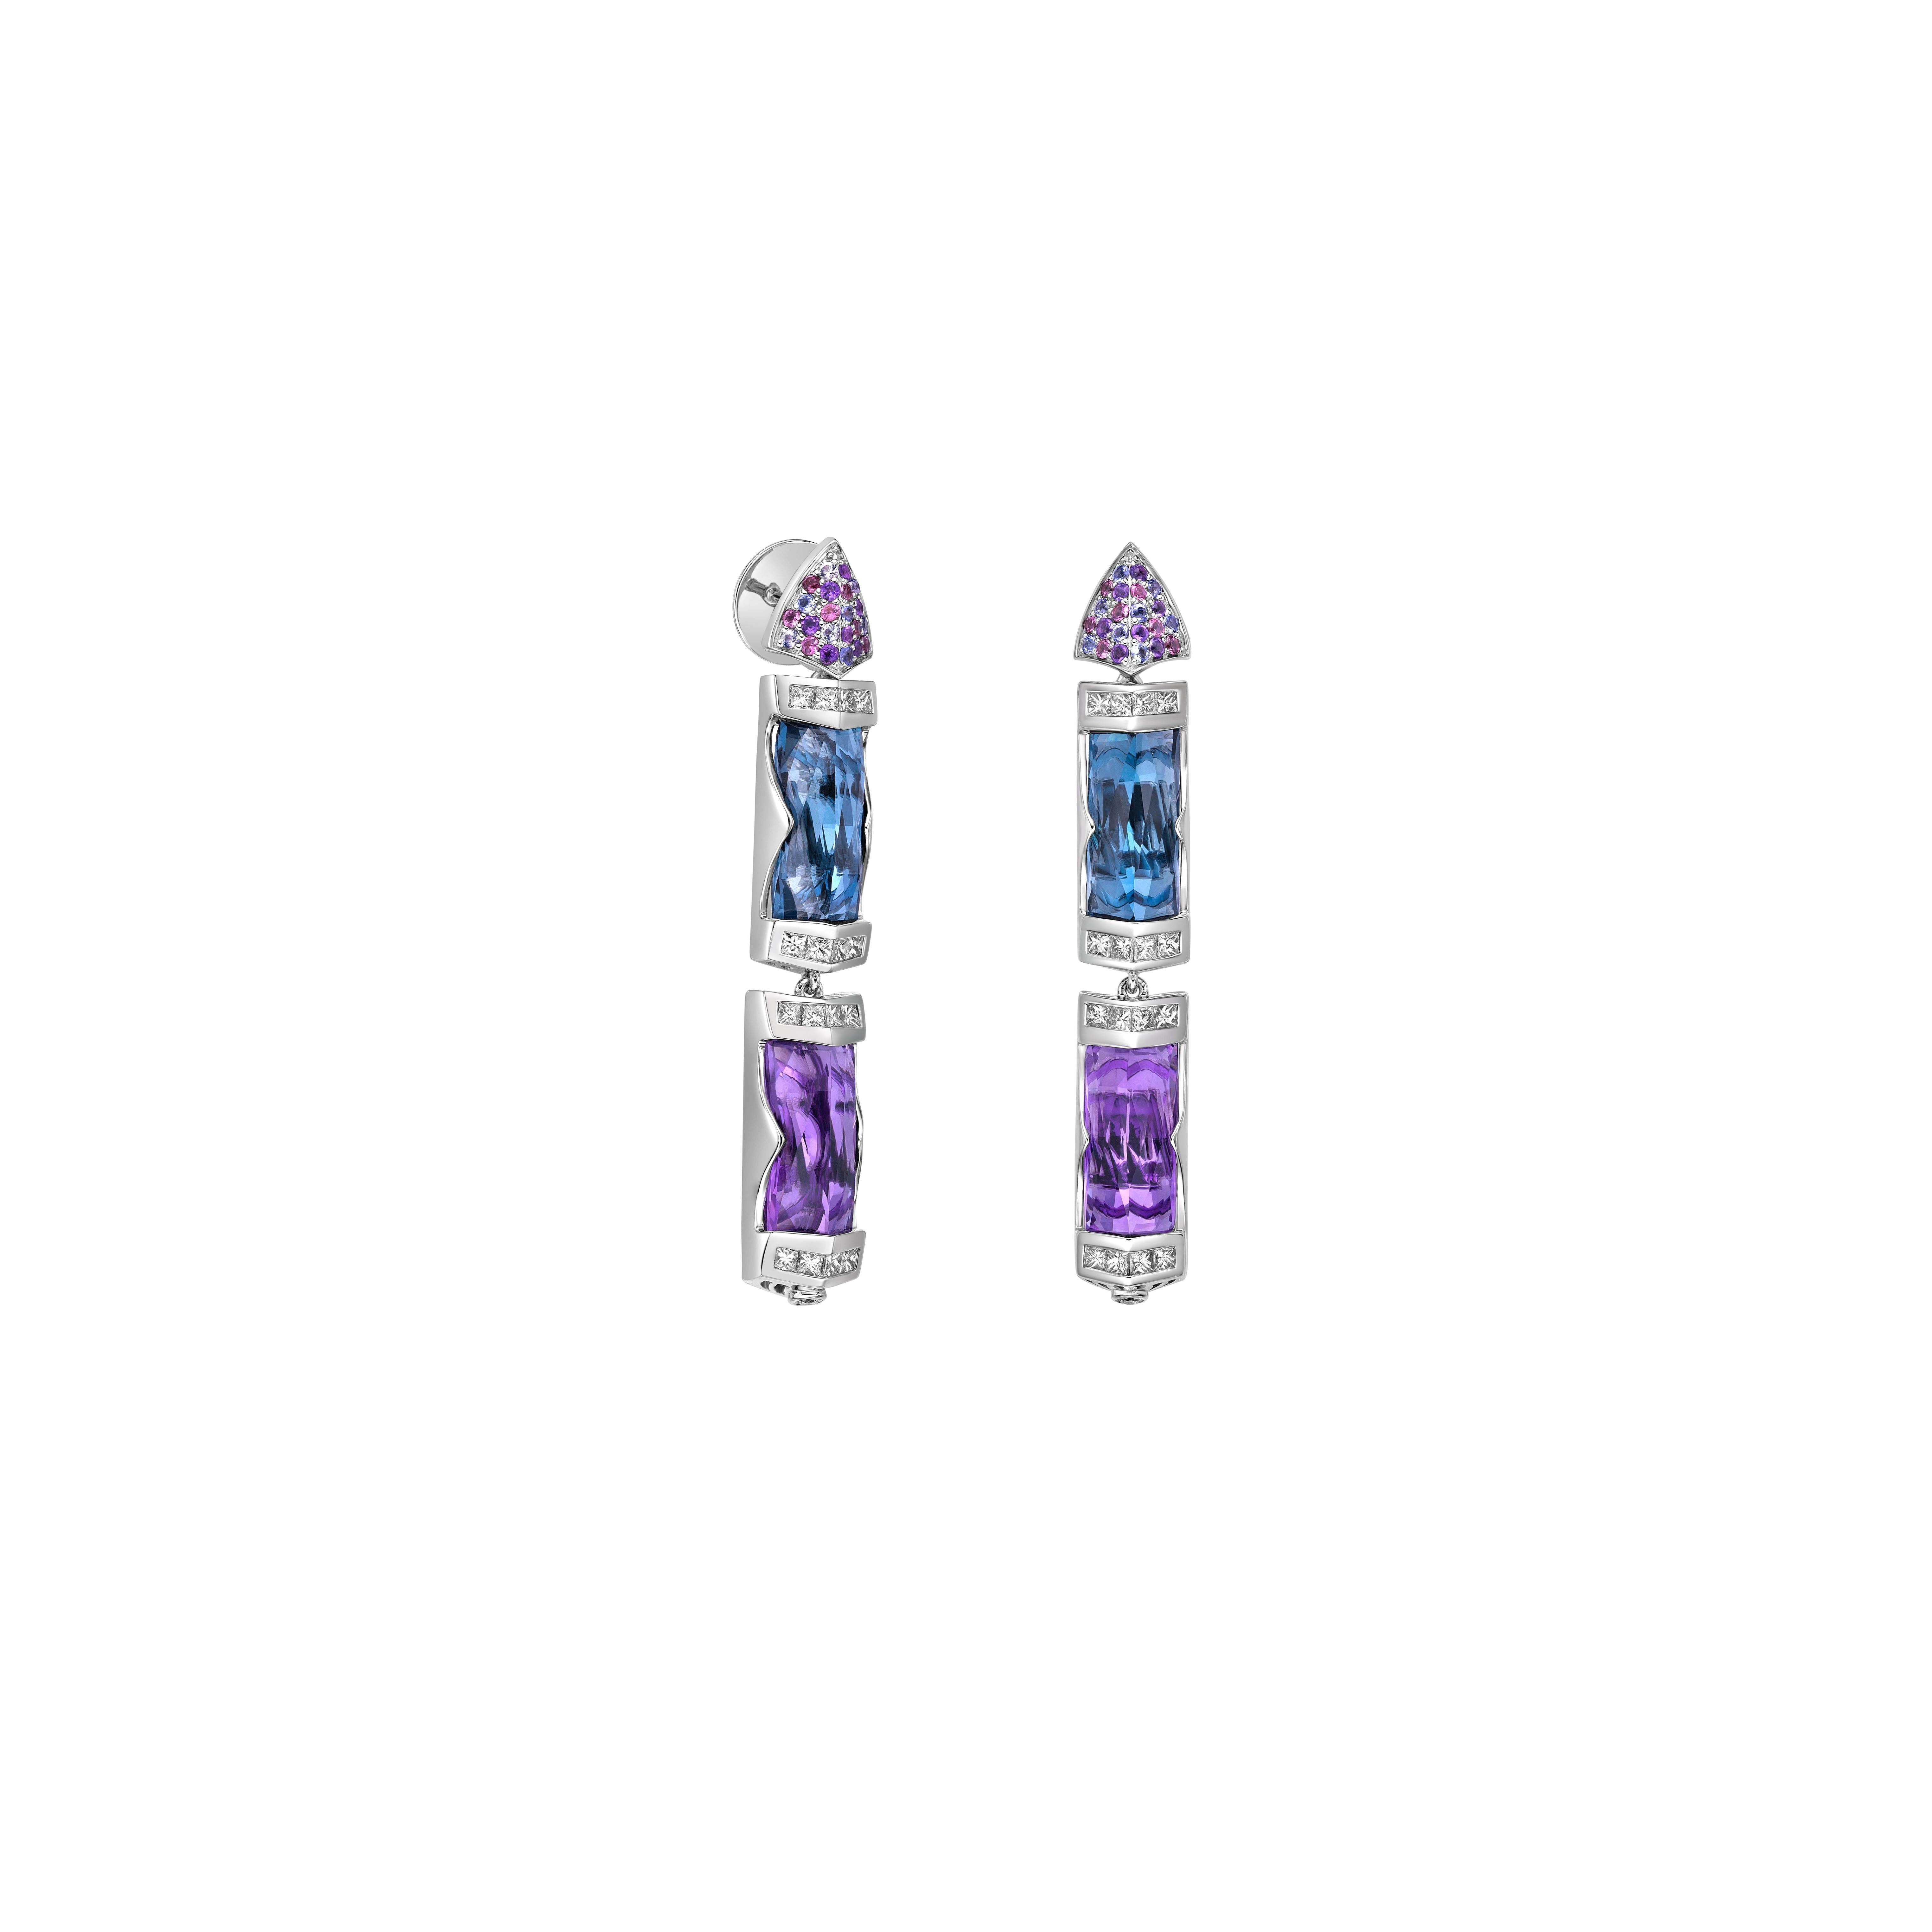 Presented A lovely Drop Earrings of amethyst and London blue topaz is perfect for people who want to wear it to any occasion or celebration. Pink tourmaline and tanzanite embellishments on Top add to the earring's artistic and beautiful design.